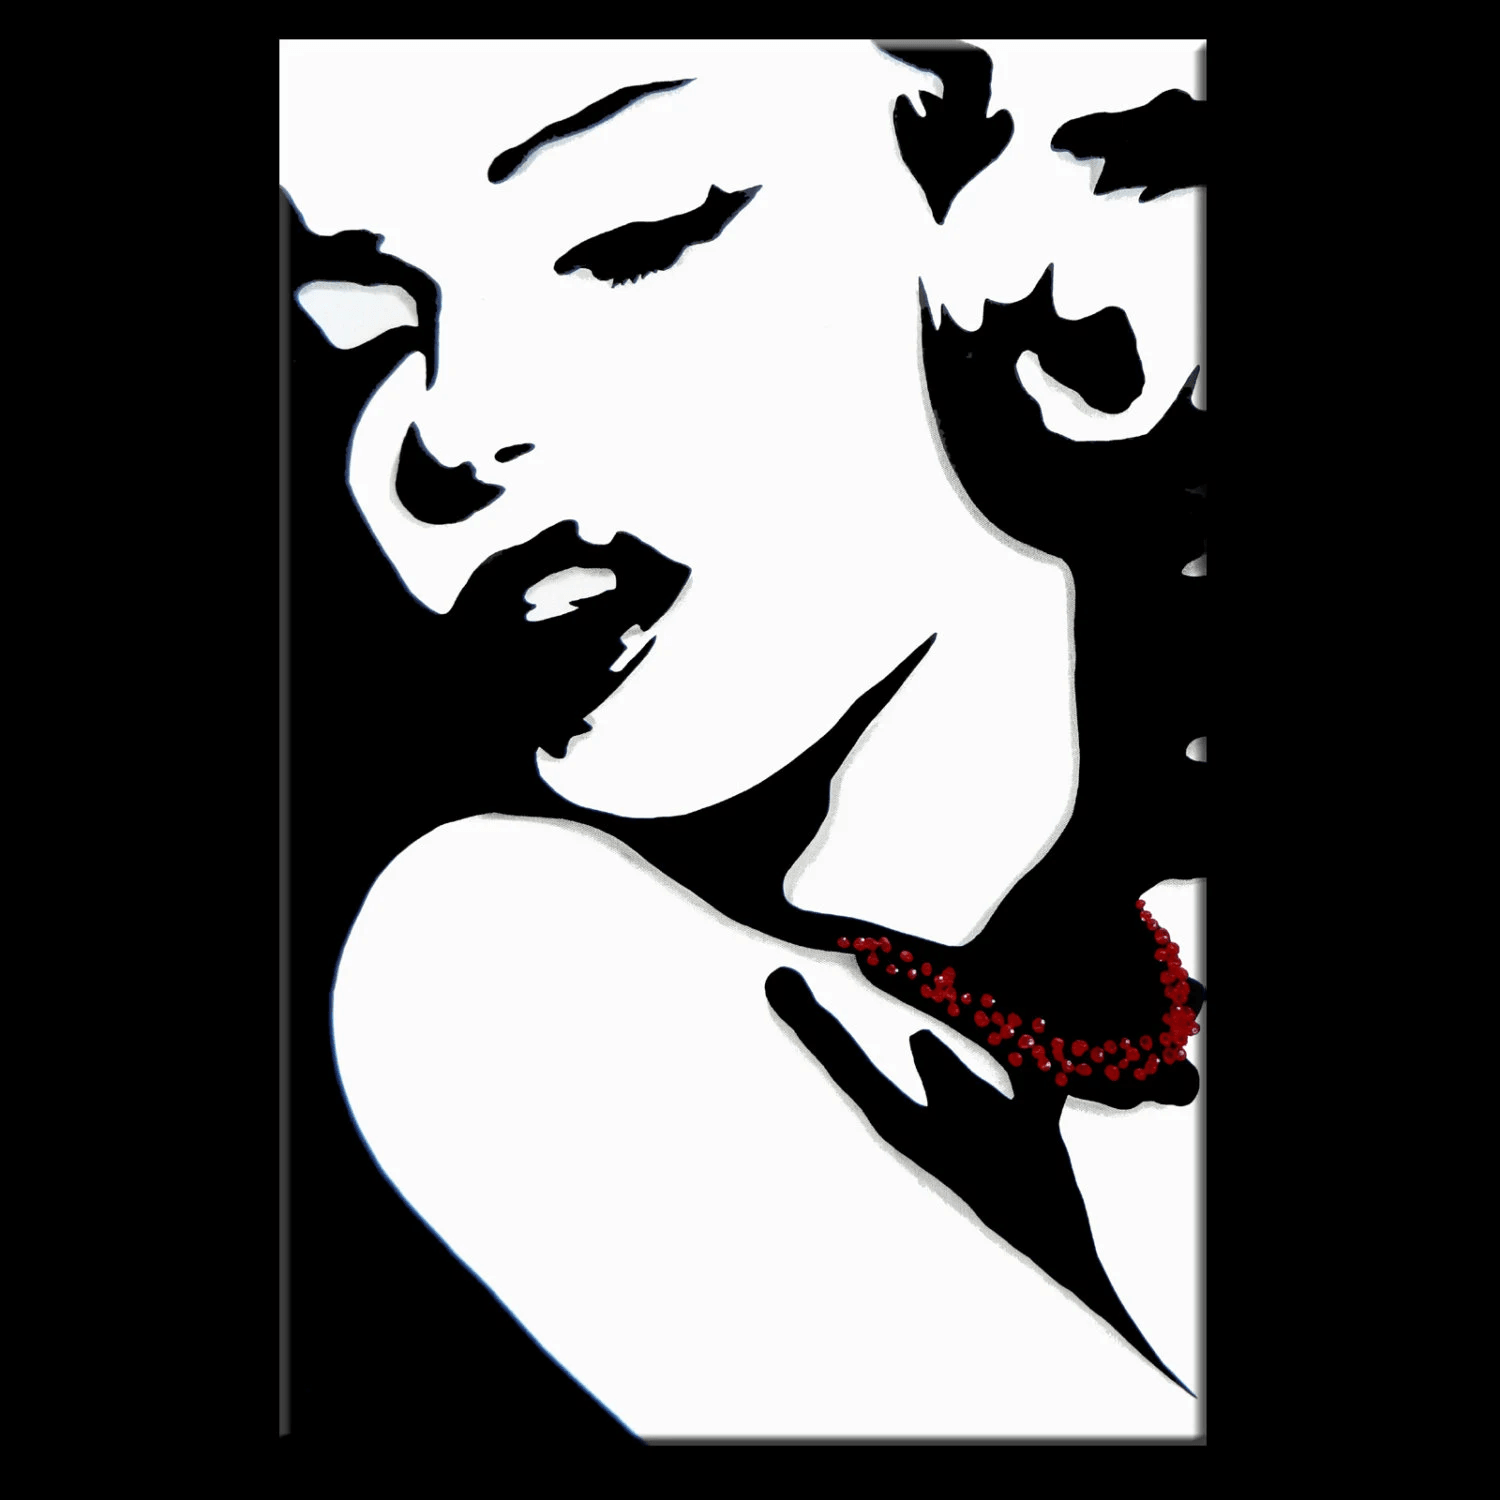 Abstract painting Modern pop Art Contemporary black white movie Portrait - Marilyn - Thomasfedro